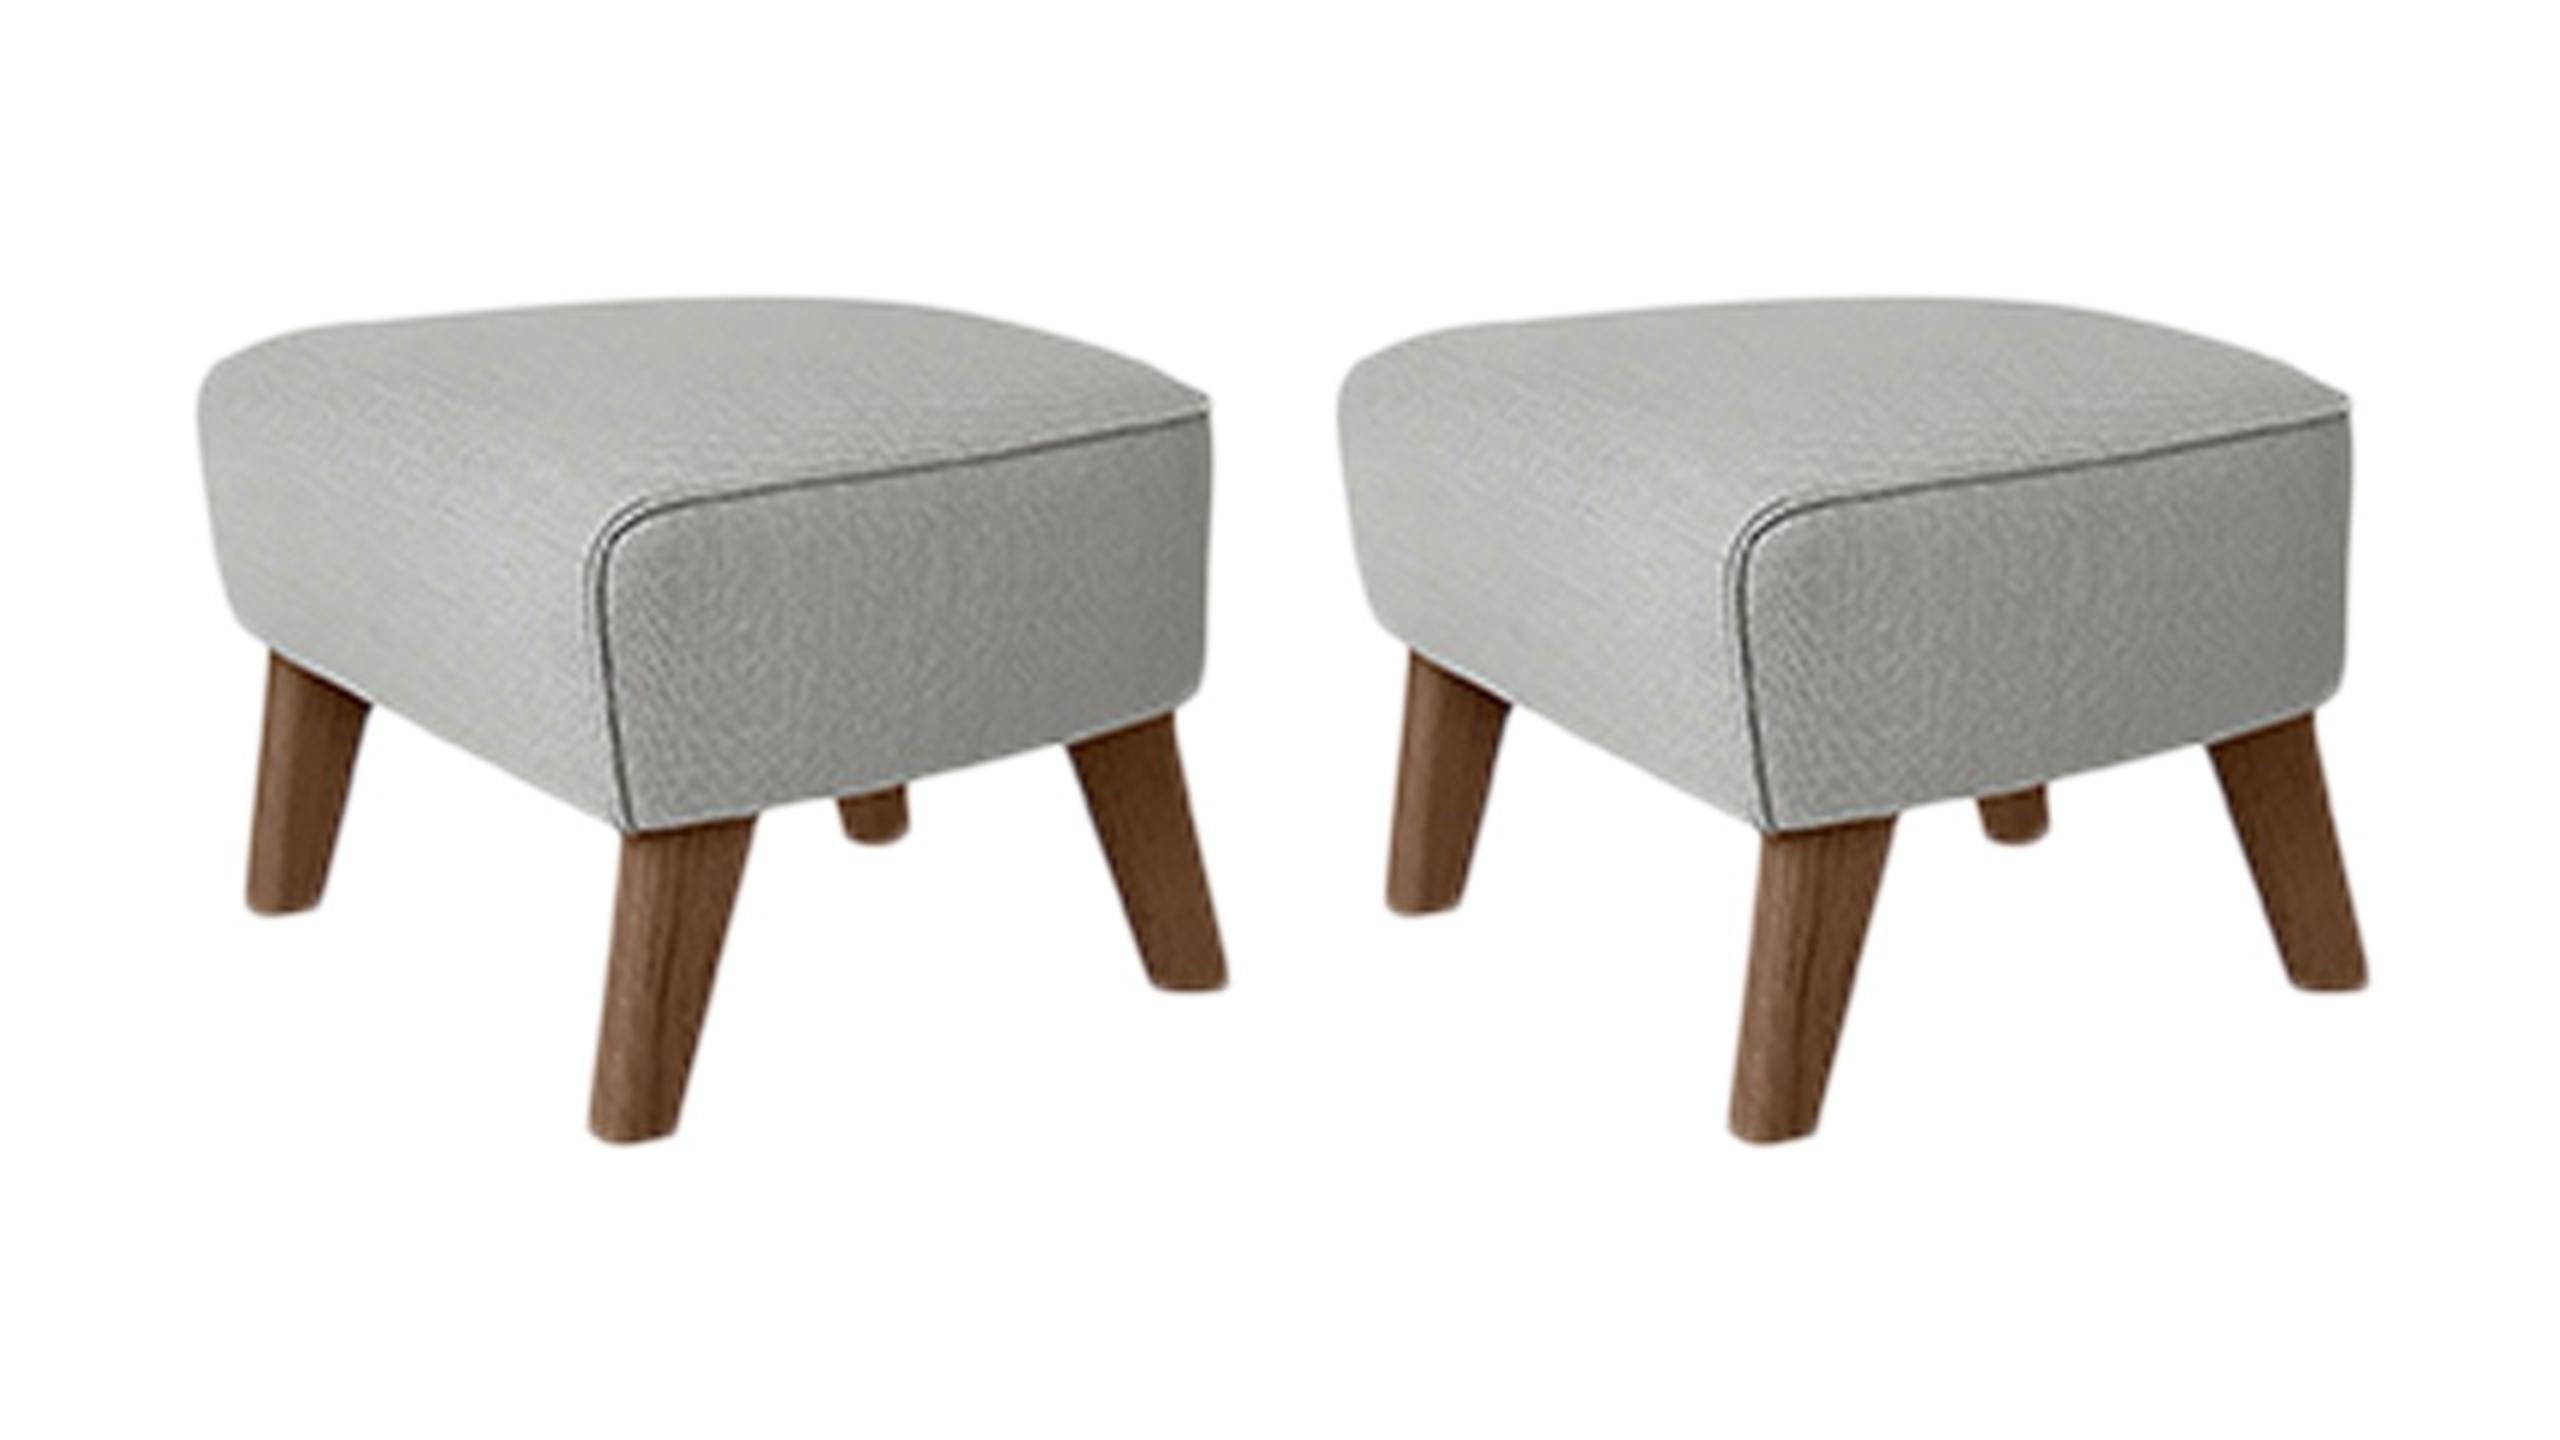 Set of 2 light grey, smoked oakraf simons vidar 3 my own chair footstool by Lassen.
Dimensions: W 56 x D 58 x H 40 cm 
Materials: Textile
Also available: other colors available.

The My Own Chair Footstool has been designed in the same spirit